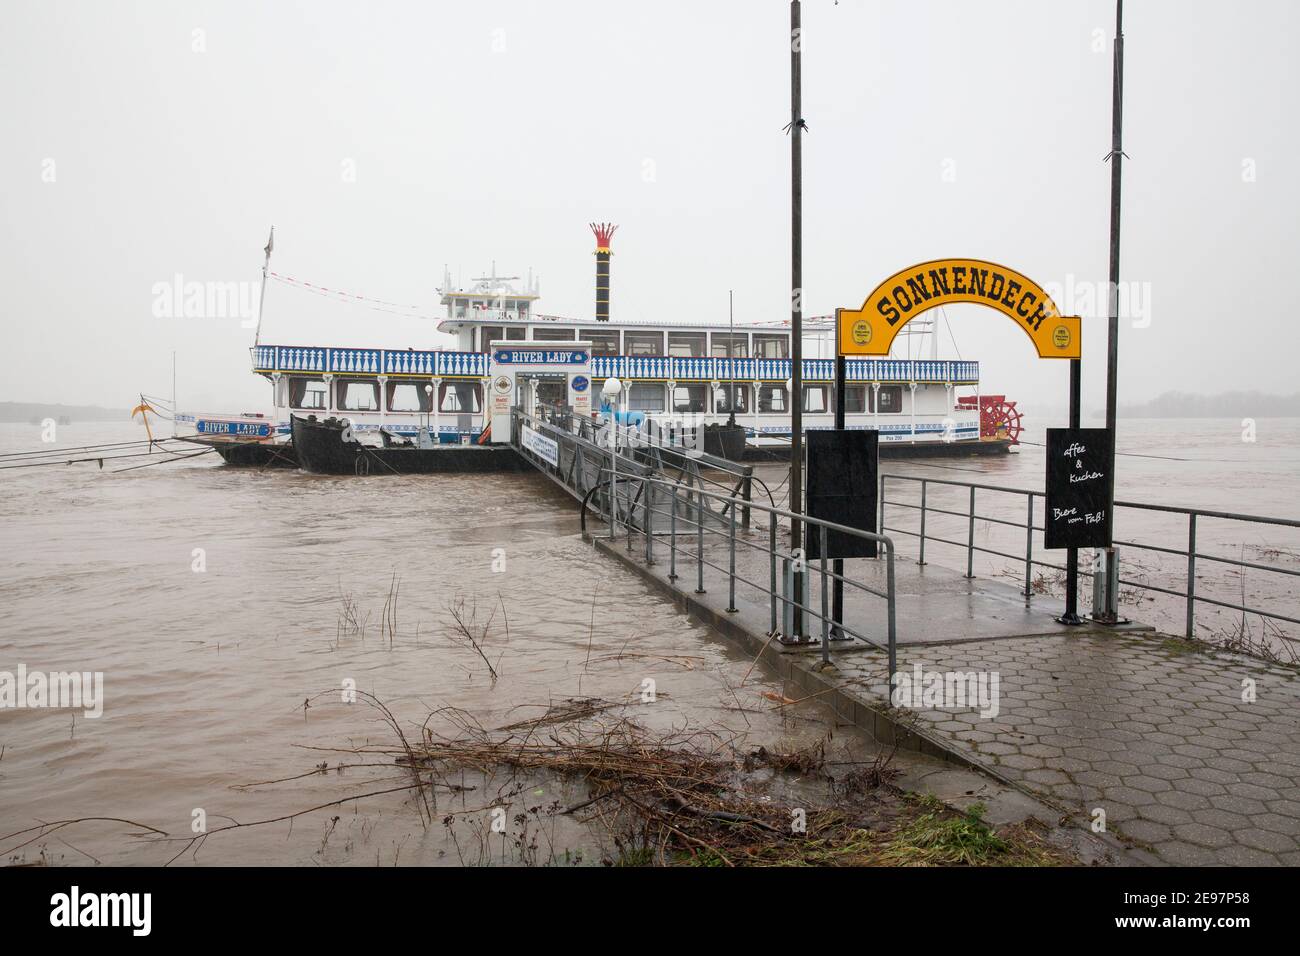 flood of the river Rhine in Wesel on the Lower Rhine on 2 February 2021, the River Lady excursion boat at the jetty, North Rhine-Westphalia, Germany. Stock Photo